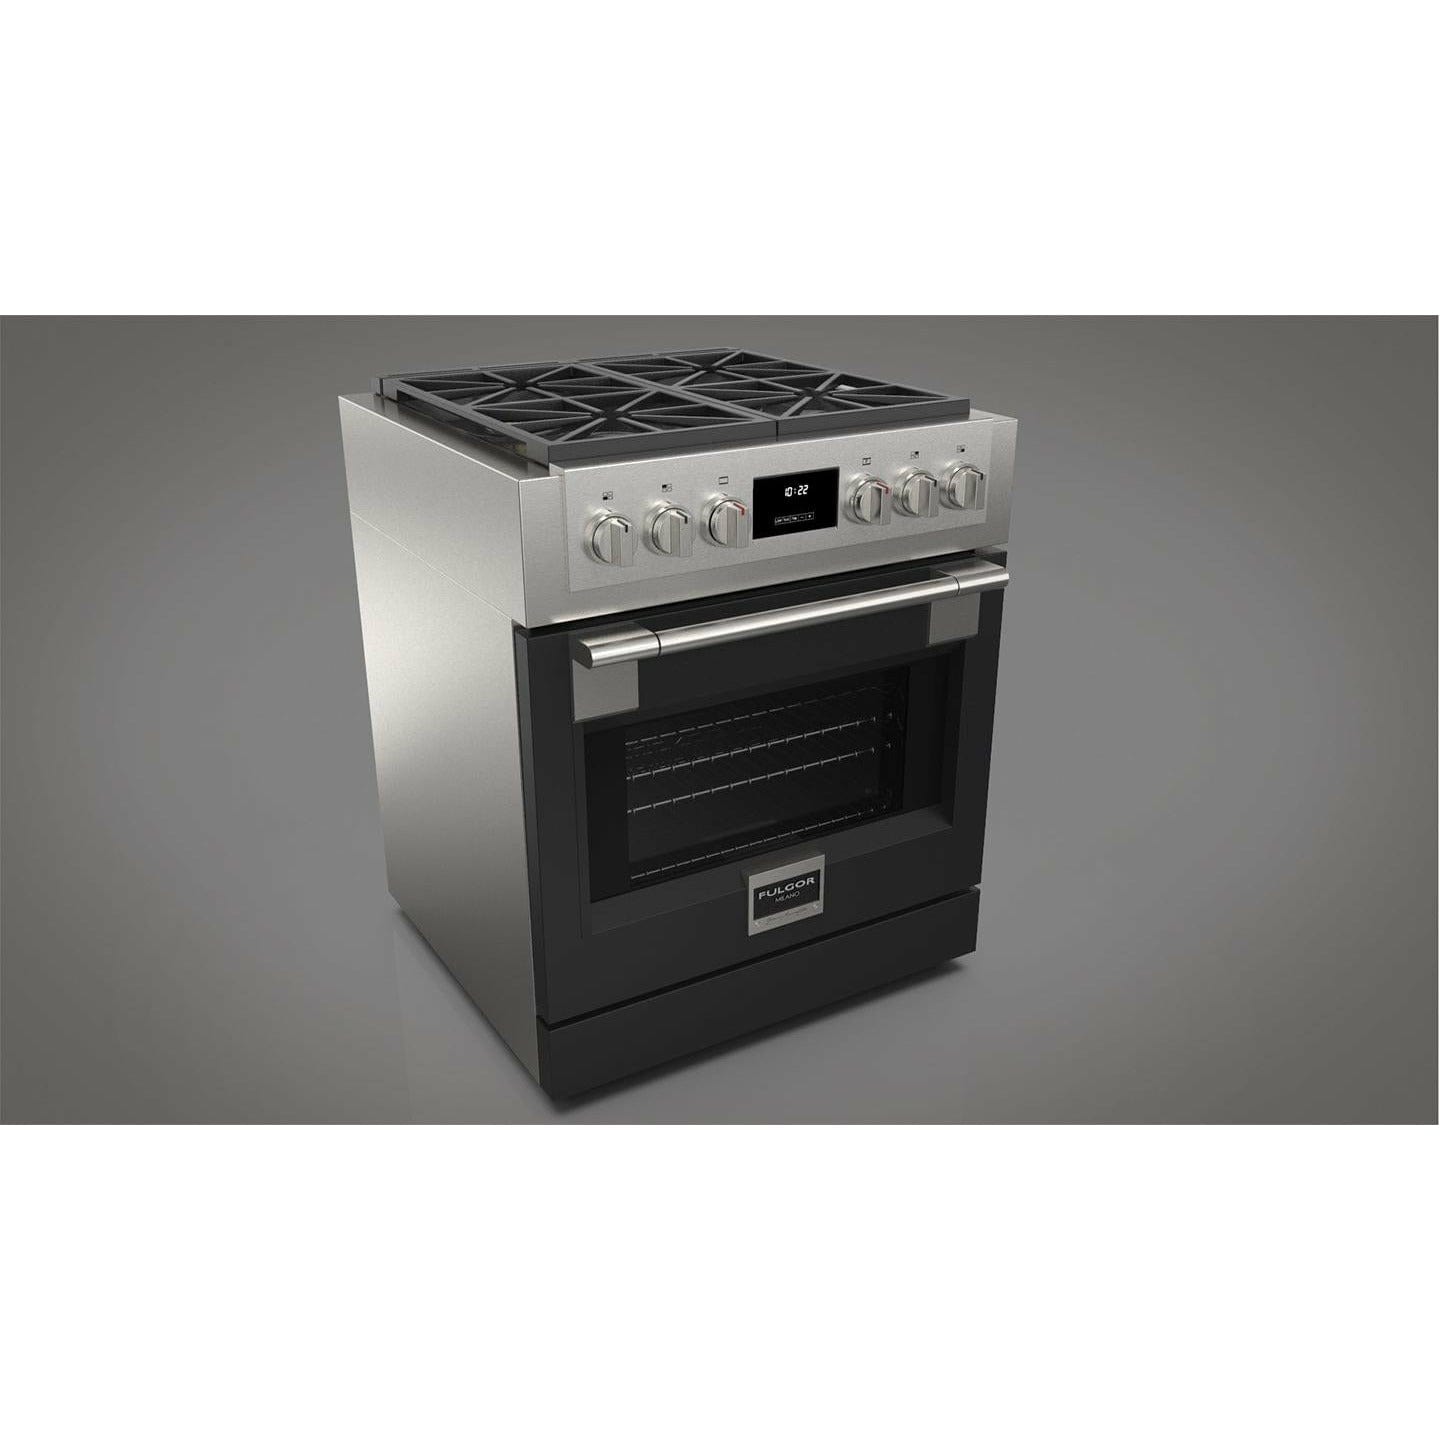 Fulgor Milano 30" Professional All Gas Range with 4 Dual-Flame Burners, 4.4 cu. ft. Capacity w/ Stainless Steel - F6PGR304S2 Ranges Luxury Appliances Direct